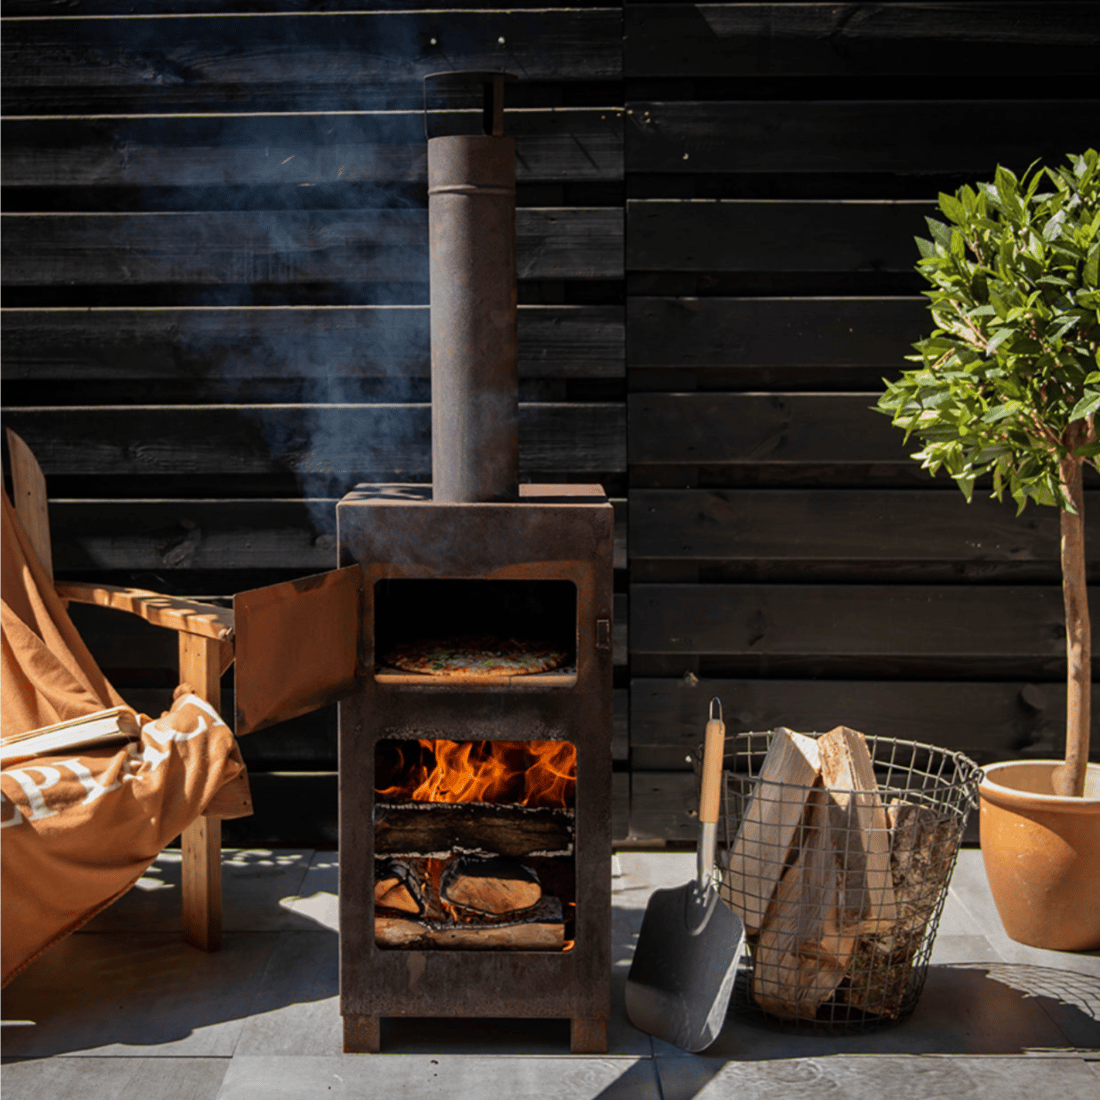 Terrace stove with pizza oven